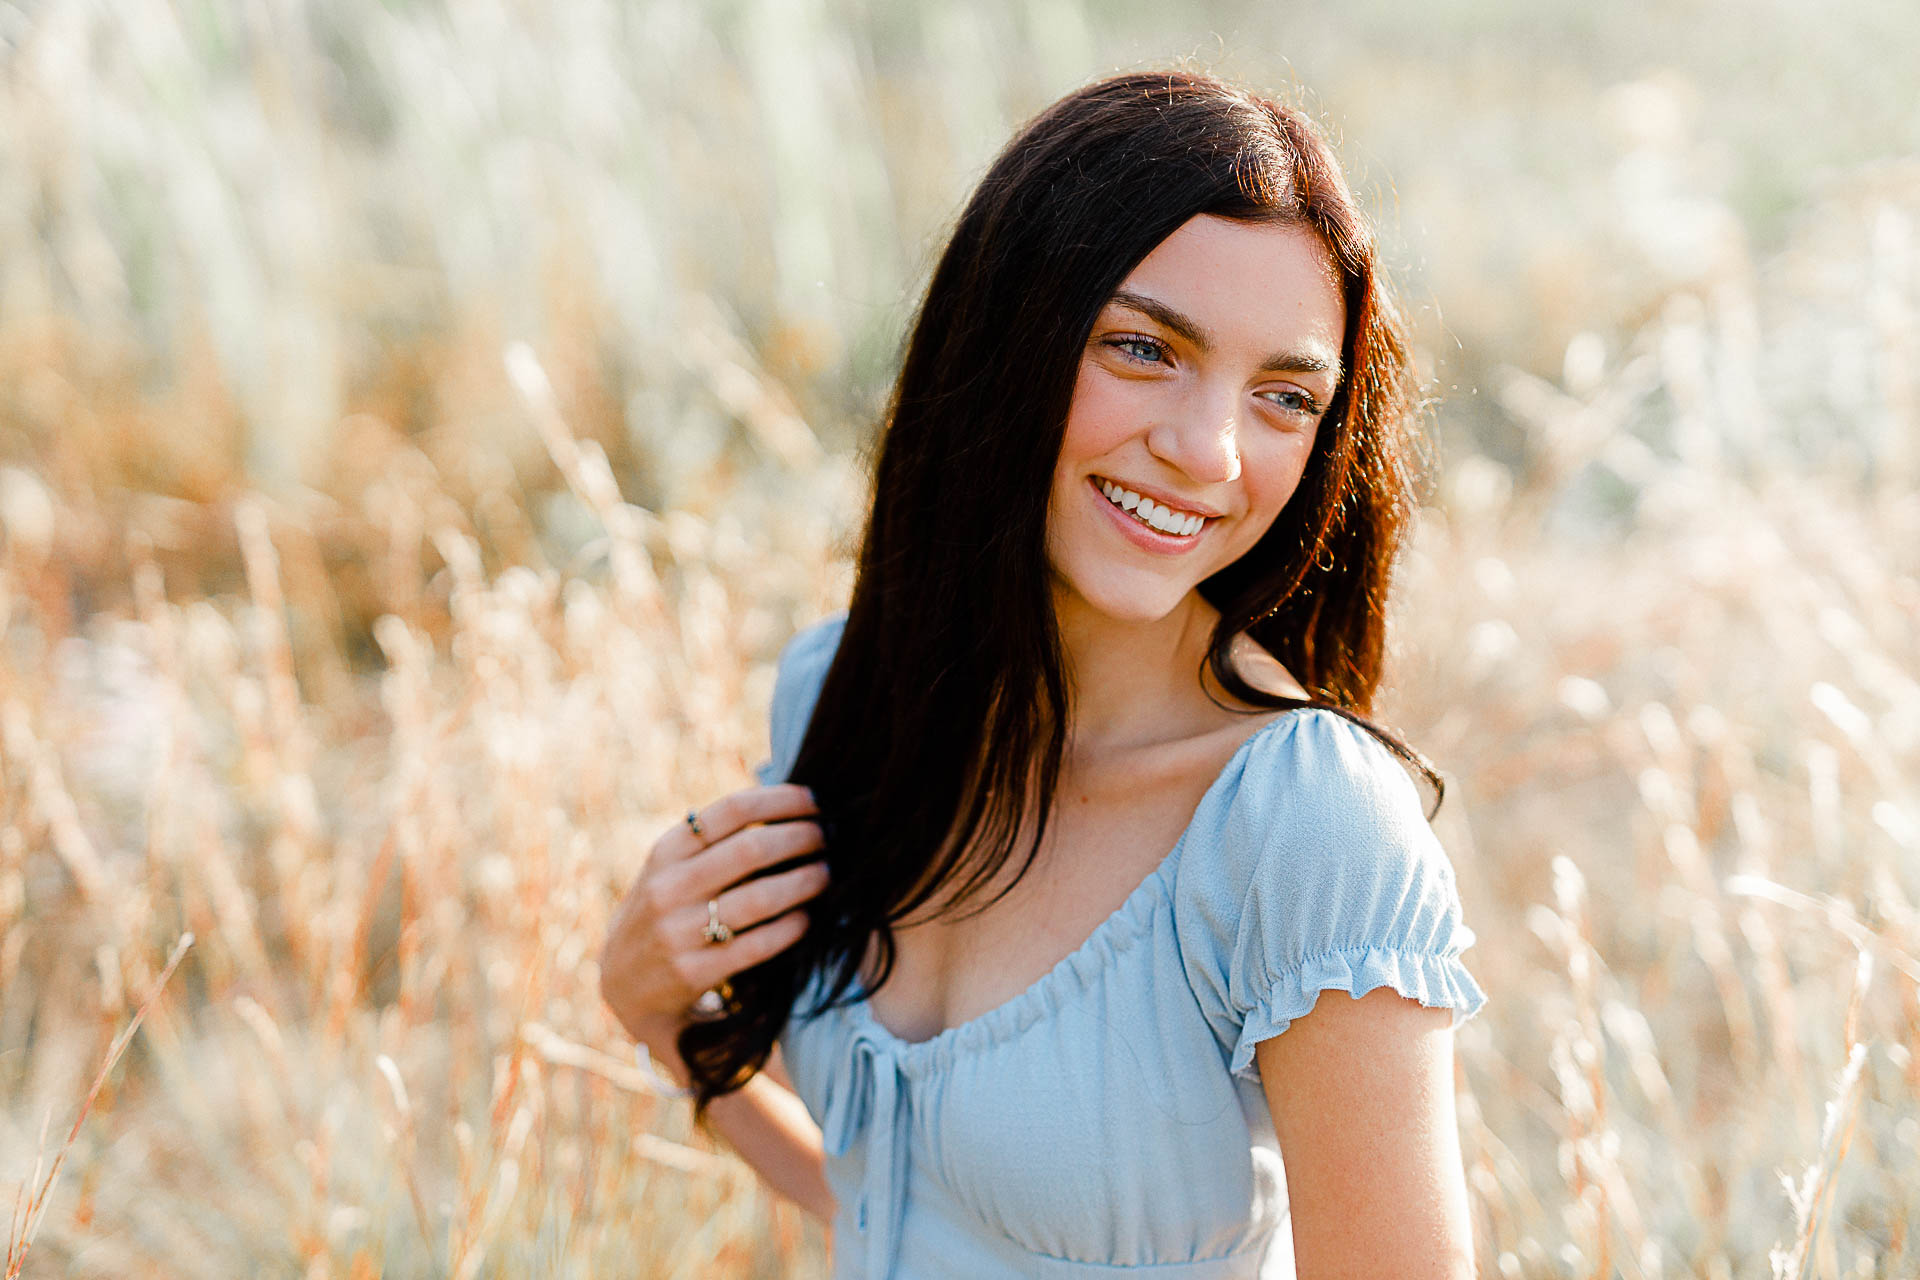 Photo by Duxbury senior photographer Christina Runnals | A high school senior girl with big blue eyes laughing and sitting in a golden field